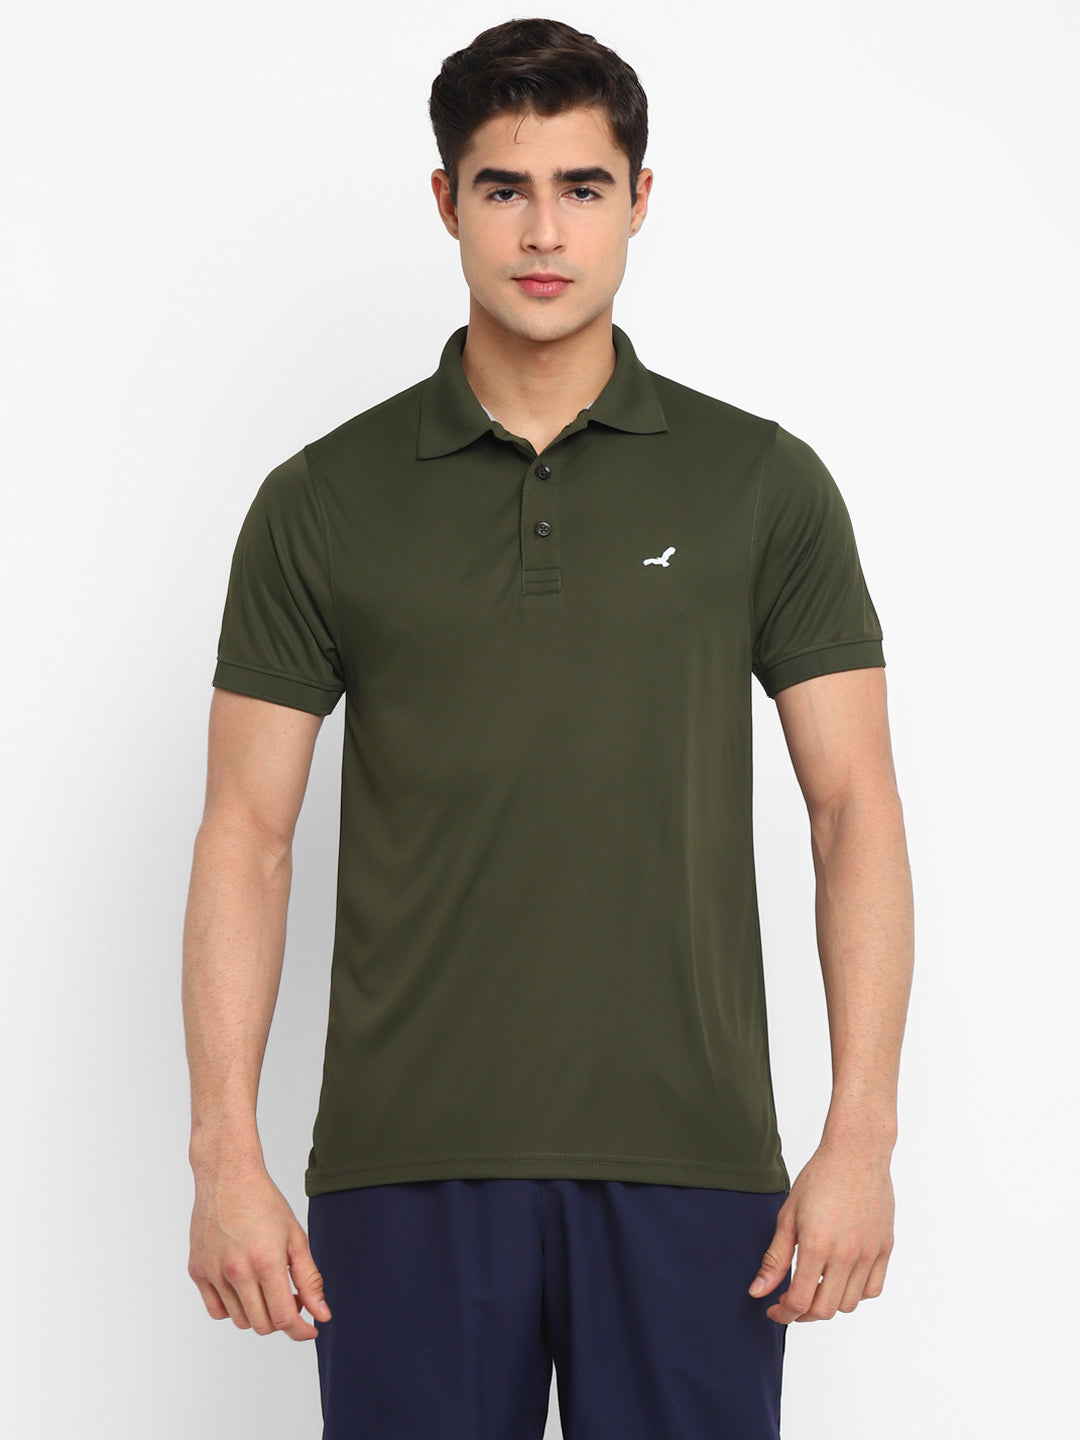 Kooltex Sports Polo T-Shirts For Men with Reflective Details - Dark Olive